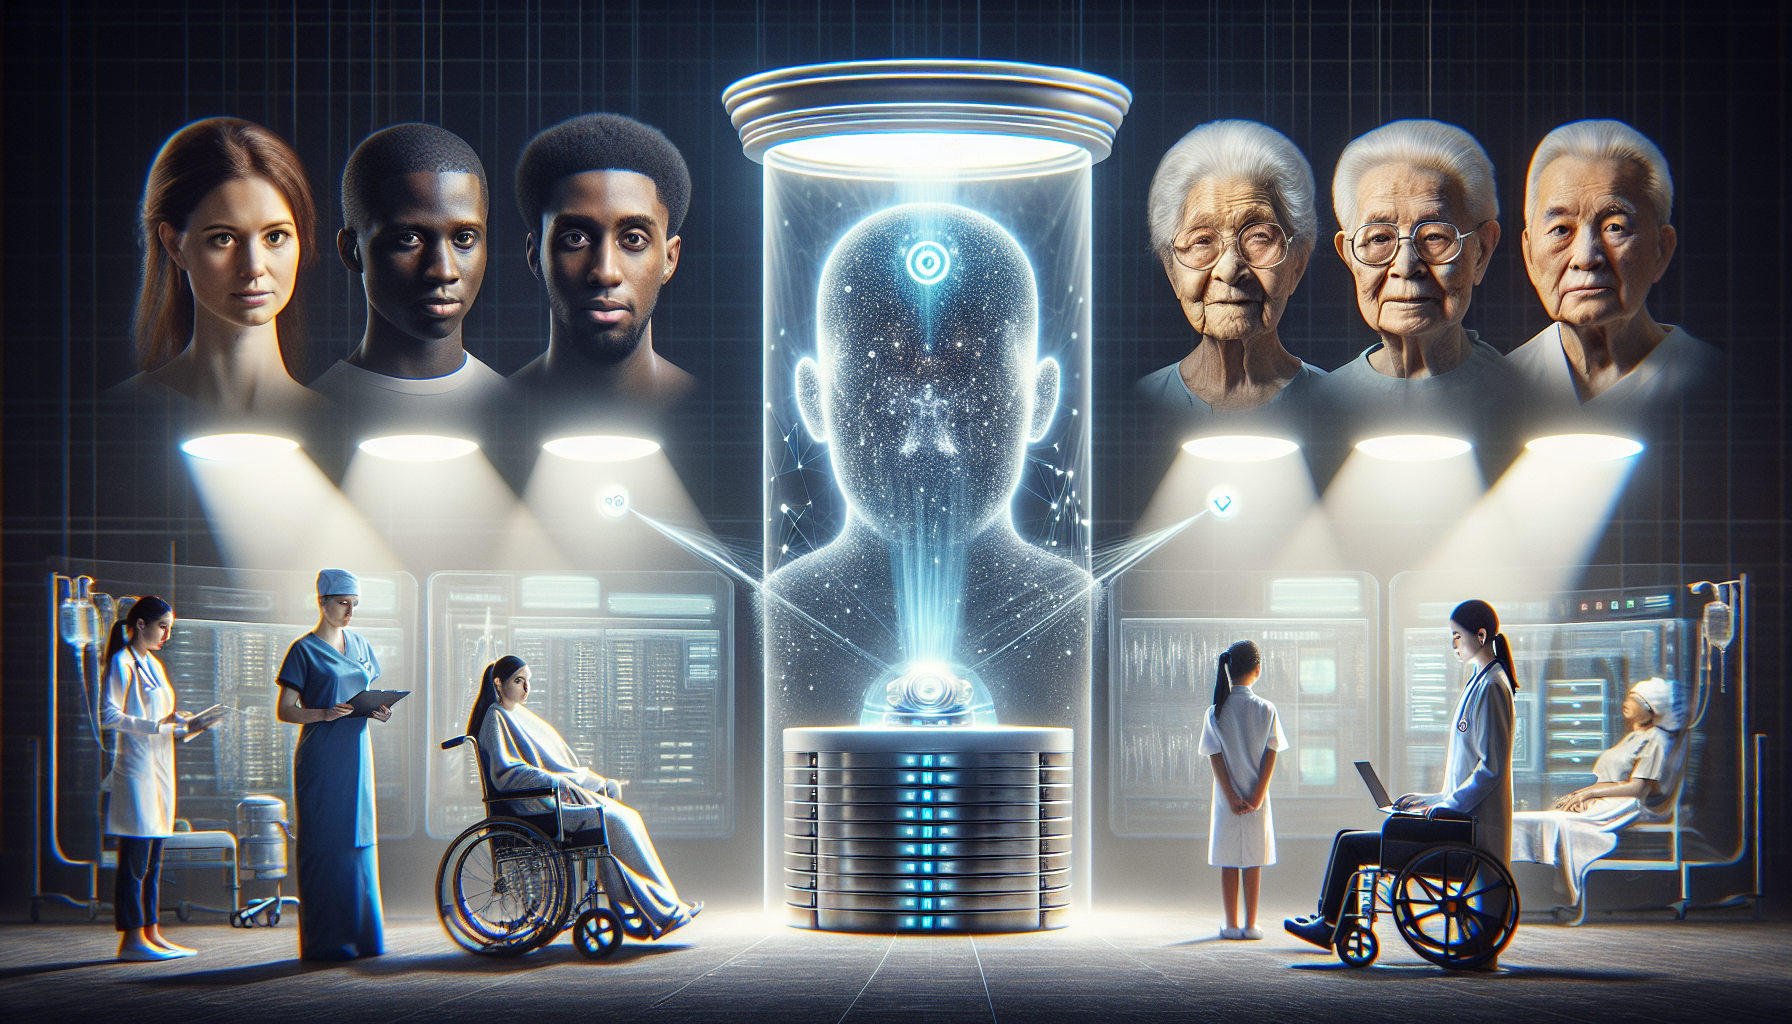 Visual representation of ethical challenges in AI healthcare applications